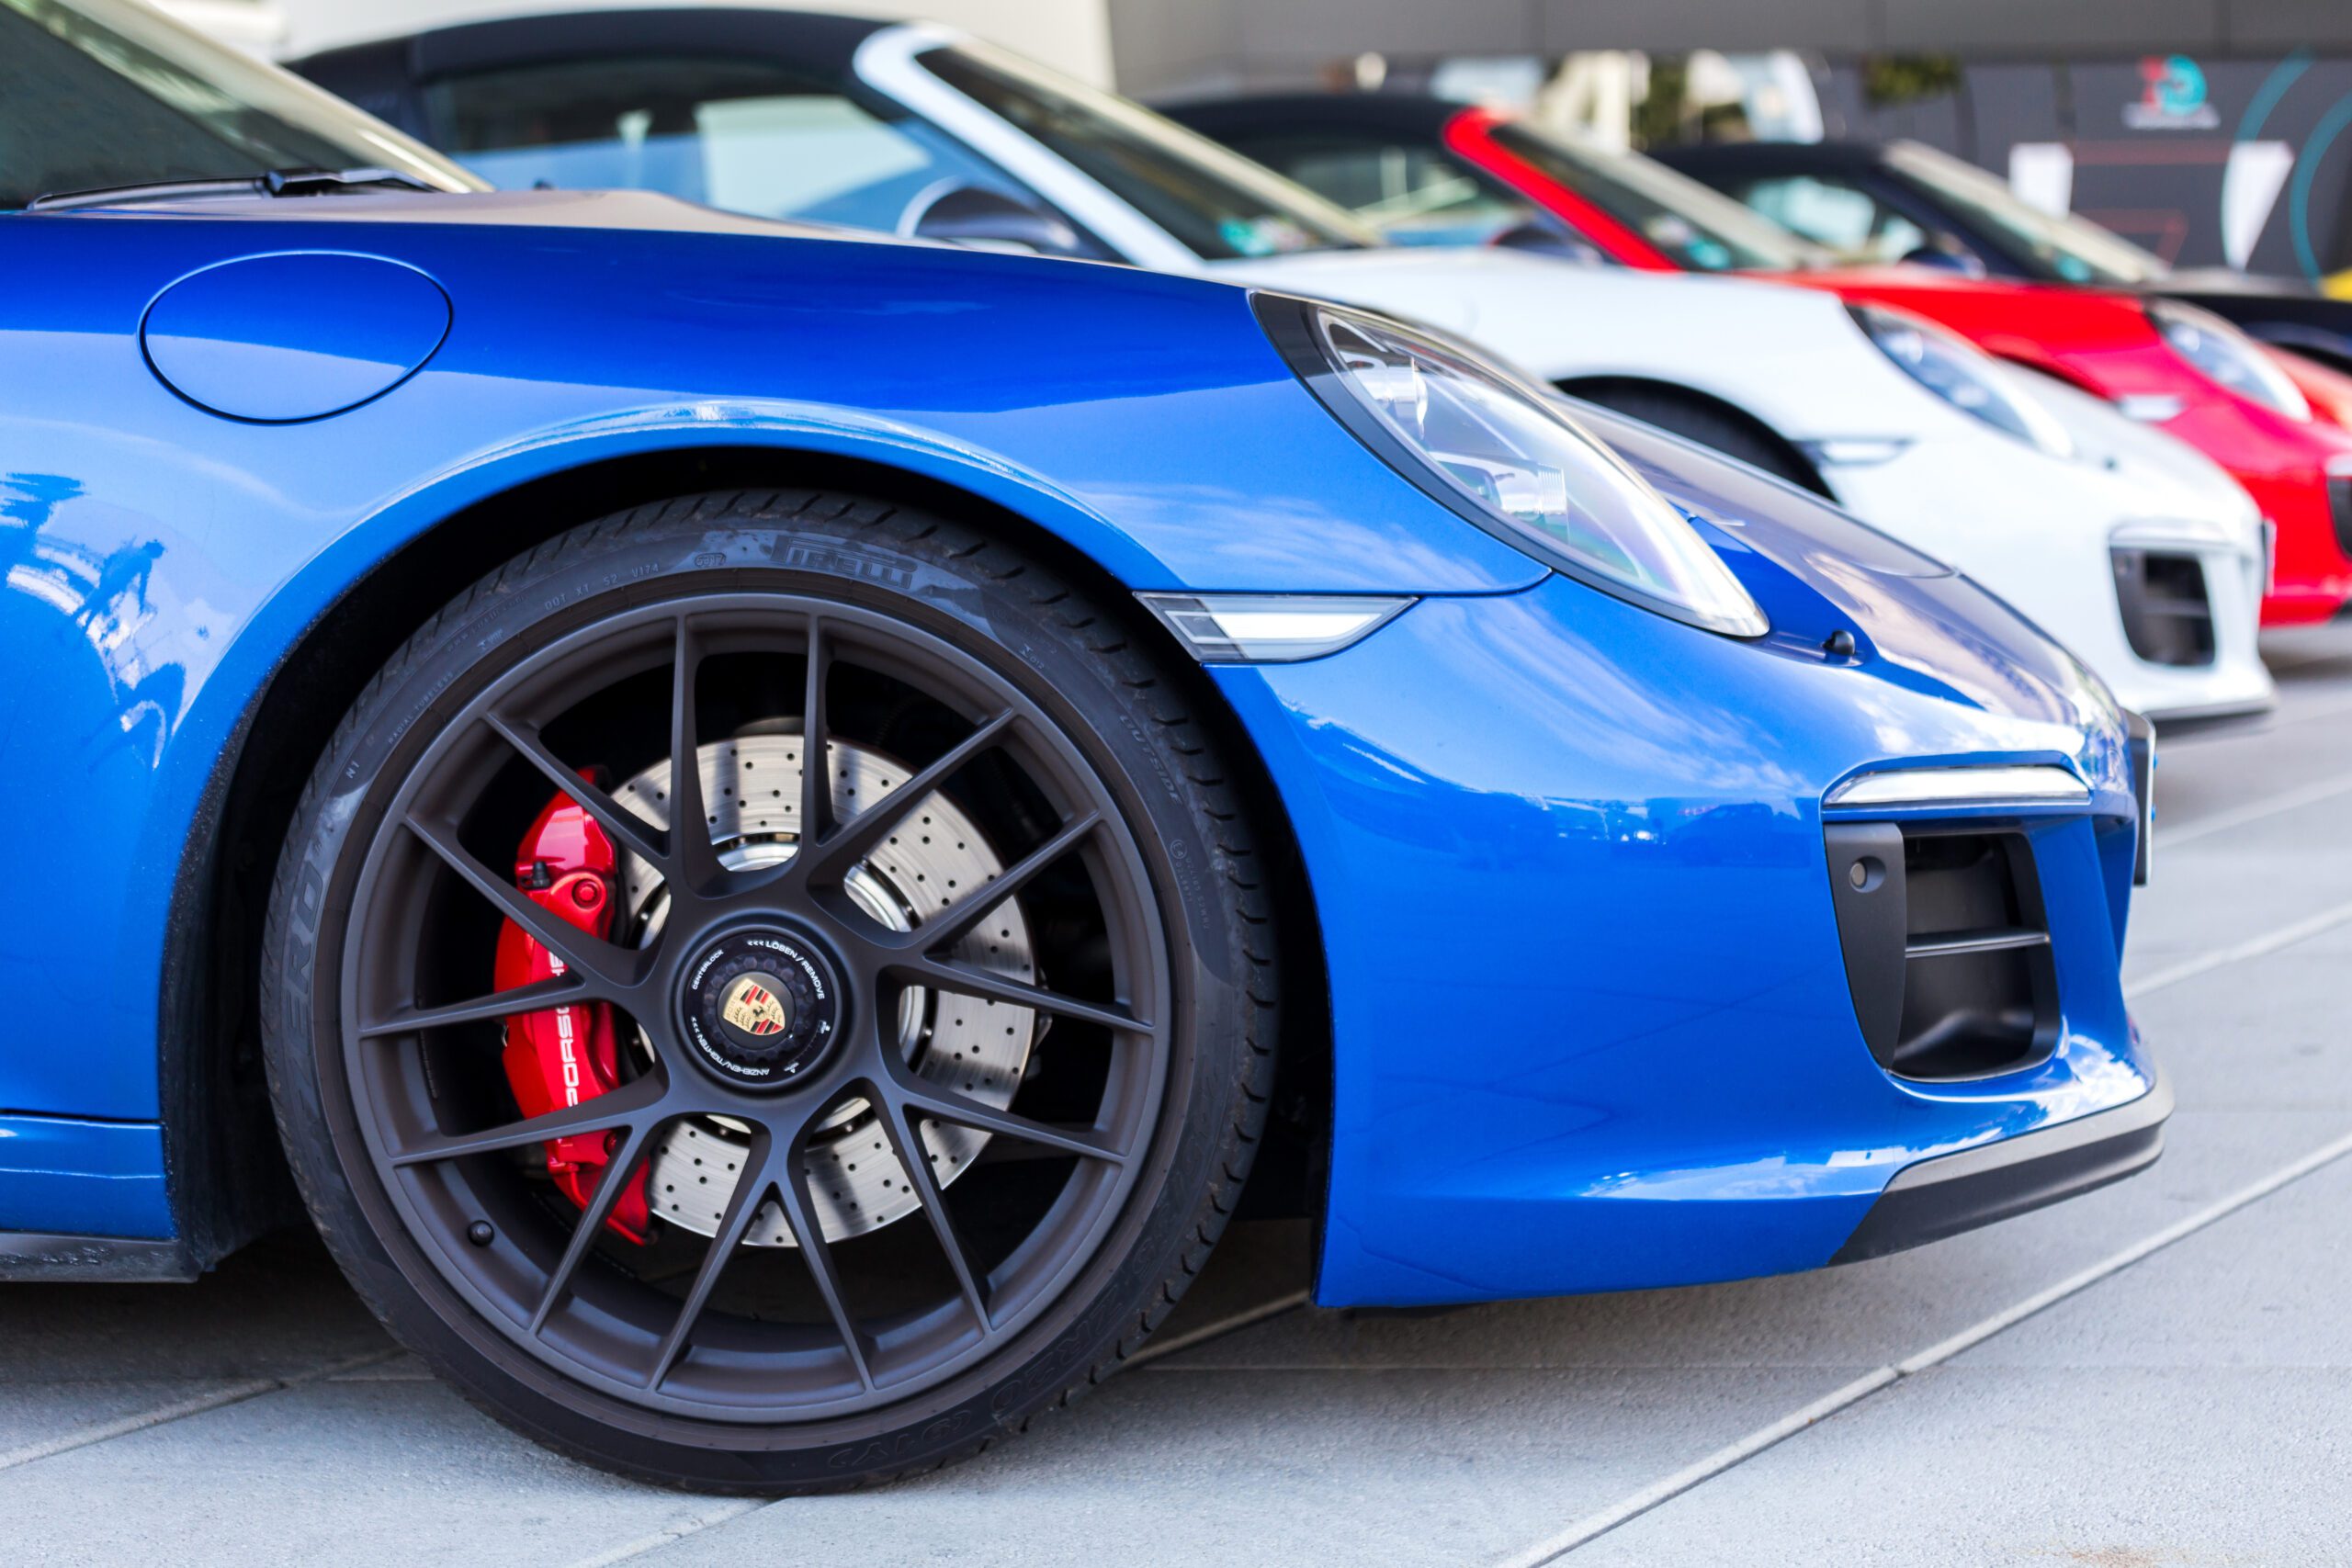 A federal court has entered an order granting final approval of a class settlement in a class action lawsuit alleging defects in about 500,000 gasoline-powered Porsche vehicles